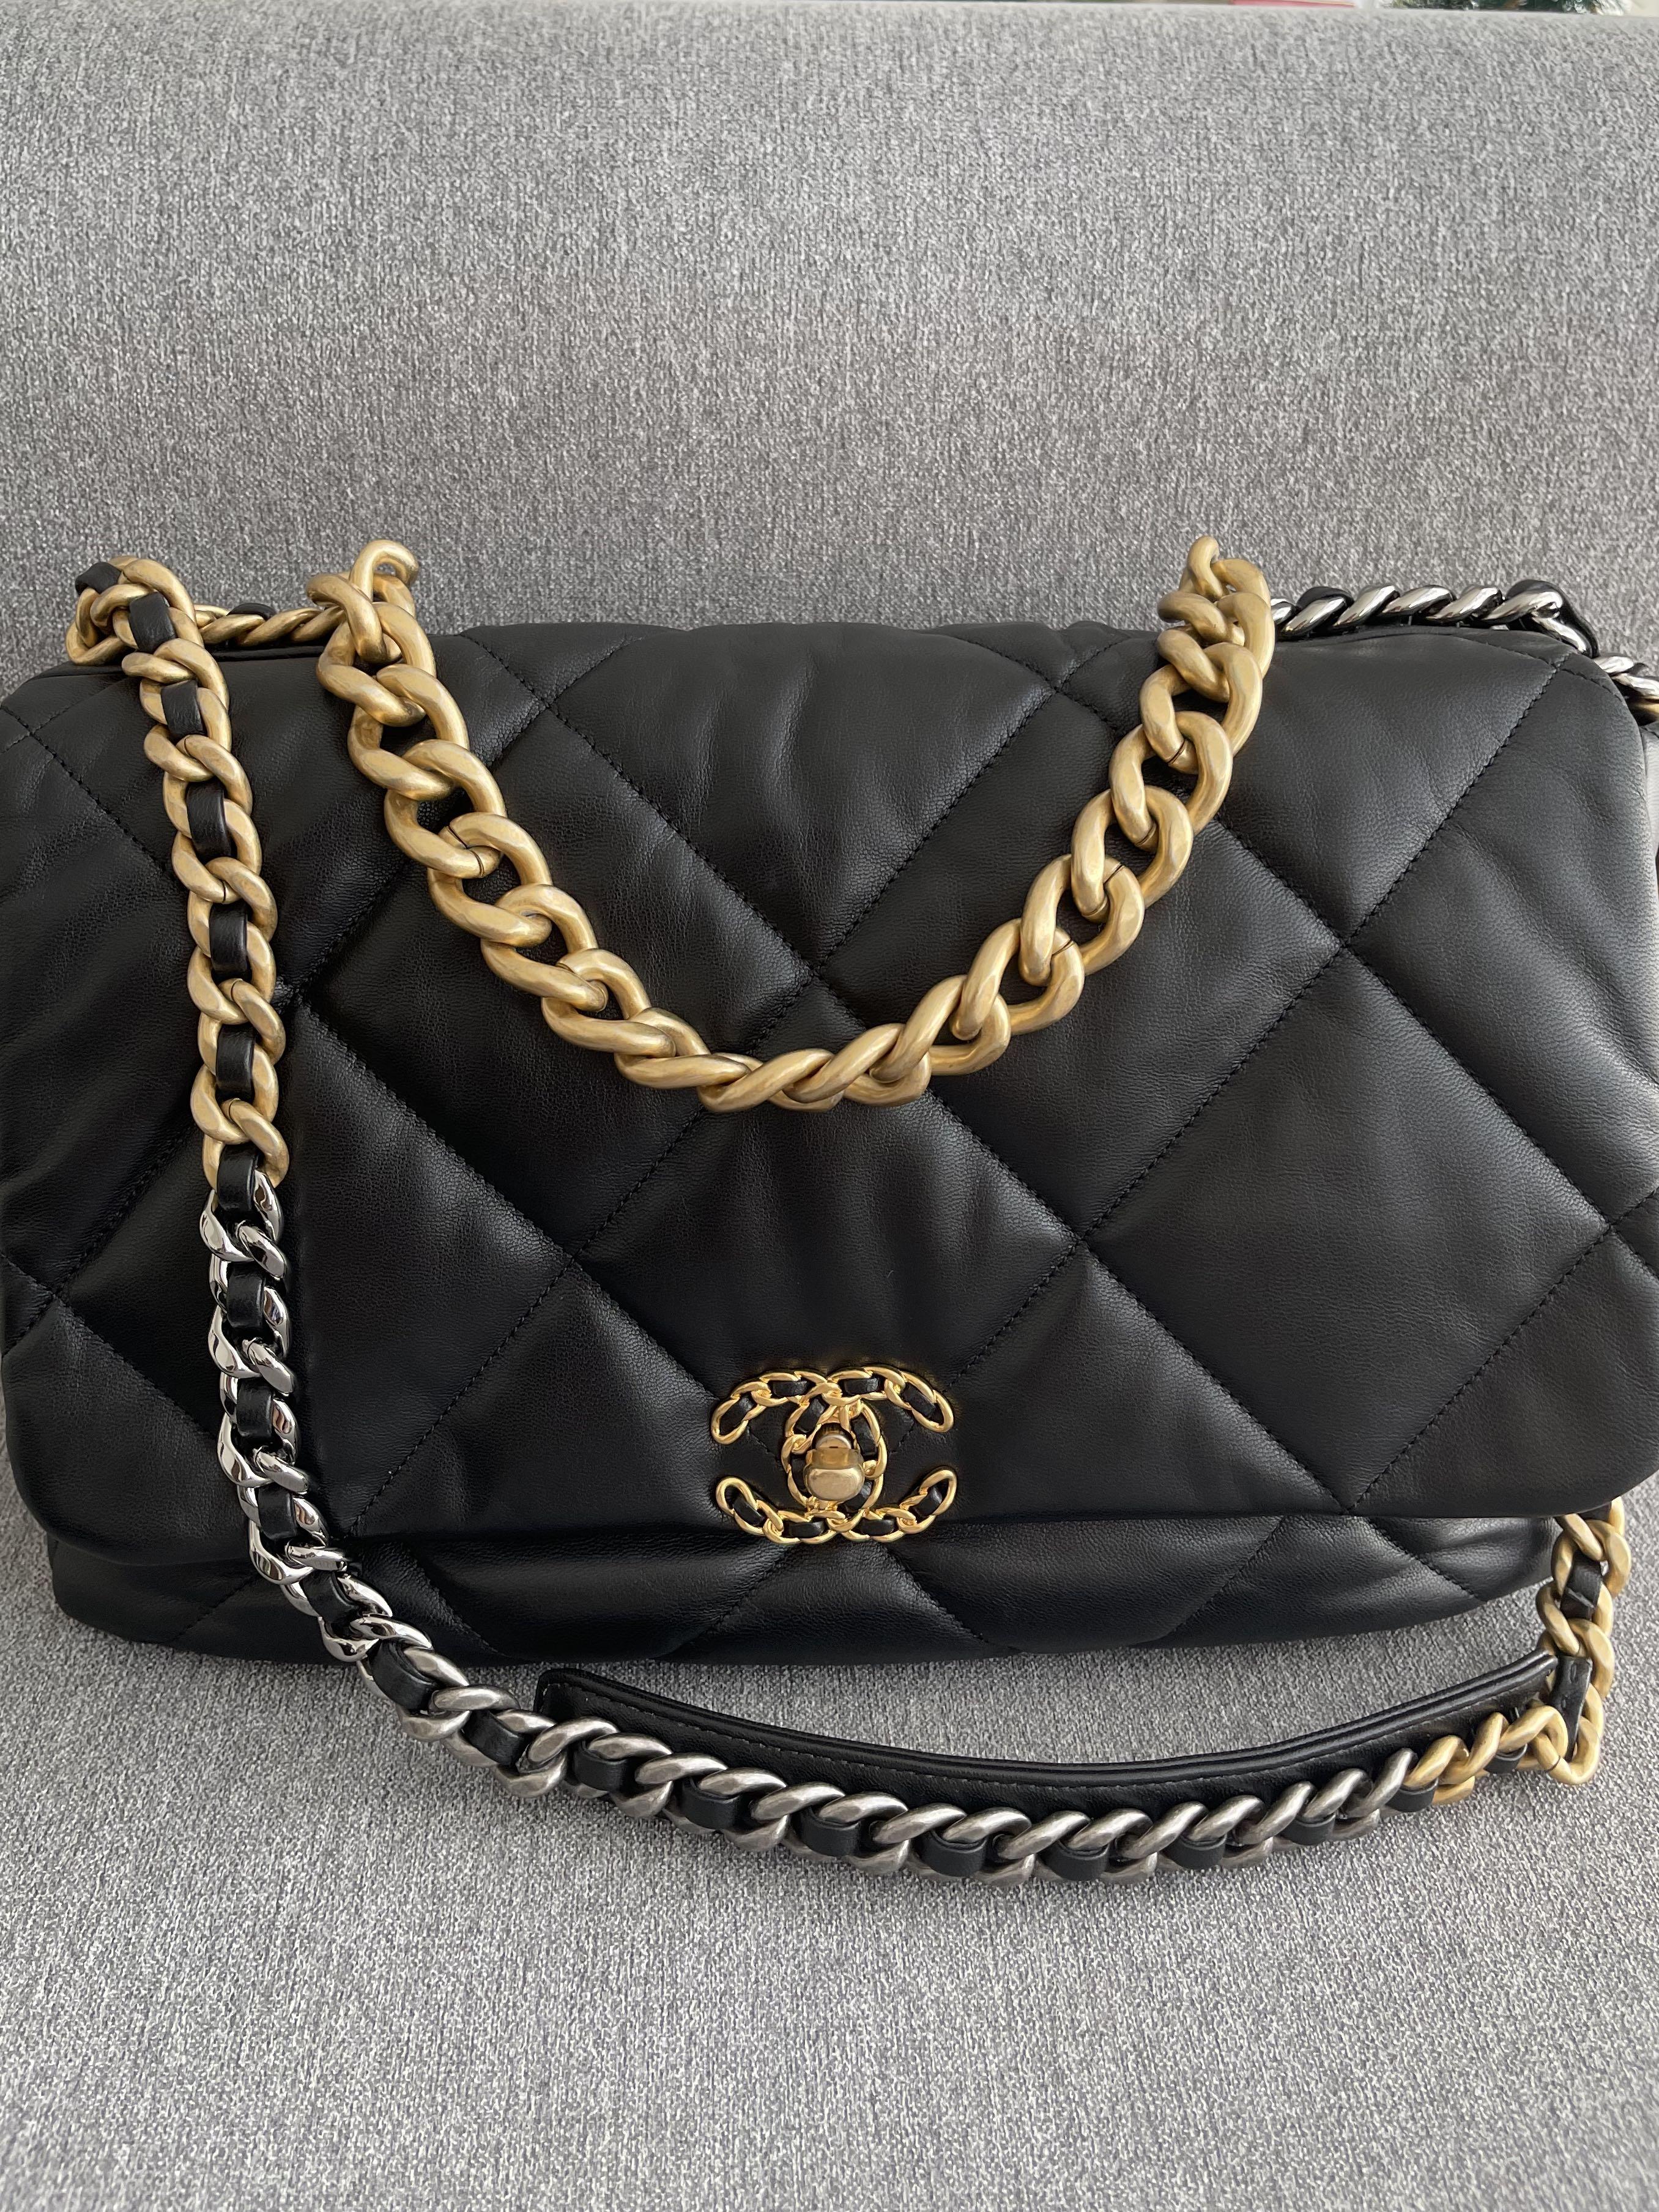 CHANEL 19 Bag in Large. Lambskin Leather in Gold-Tone, Silver-Tone